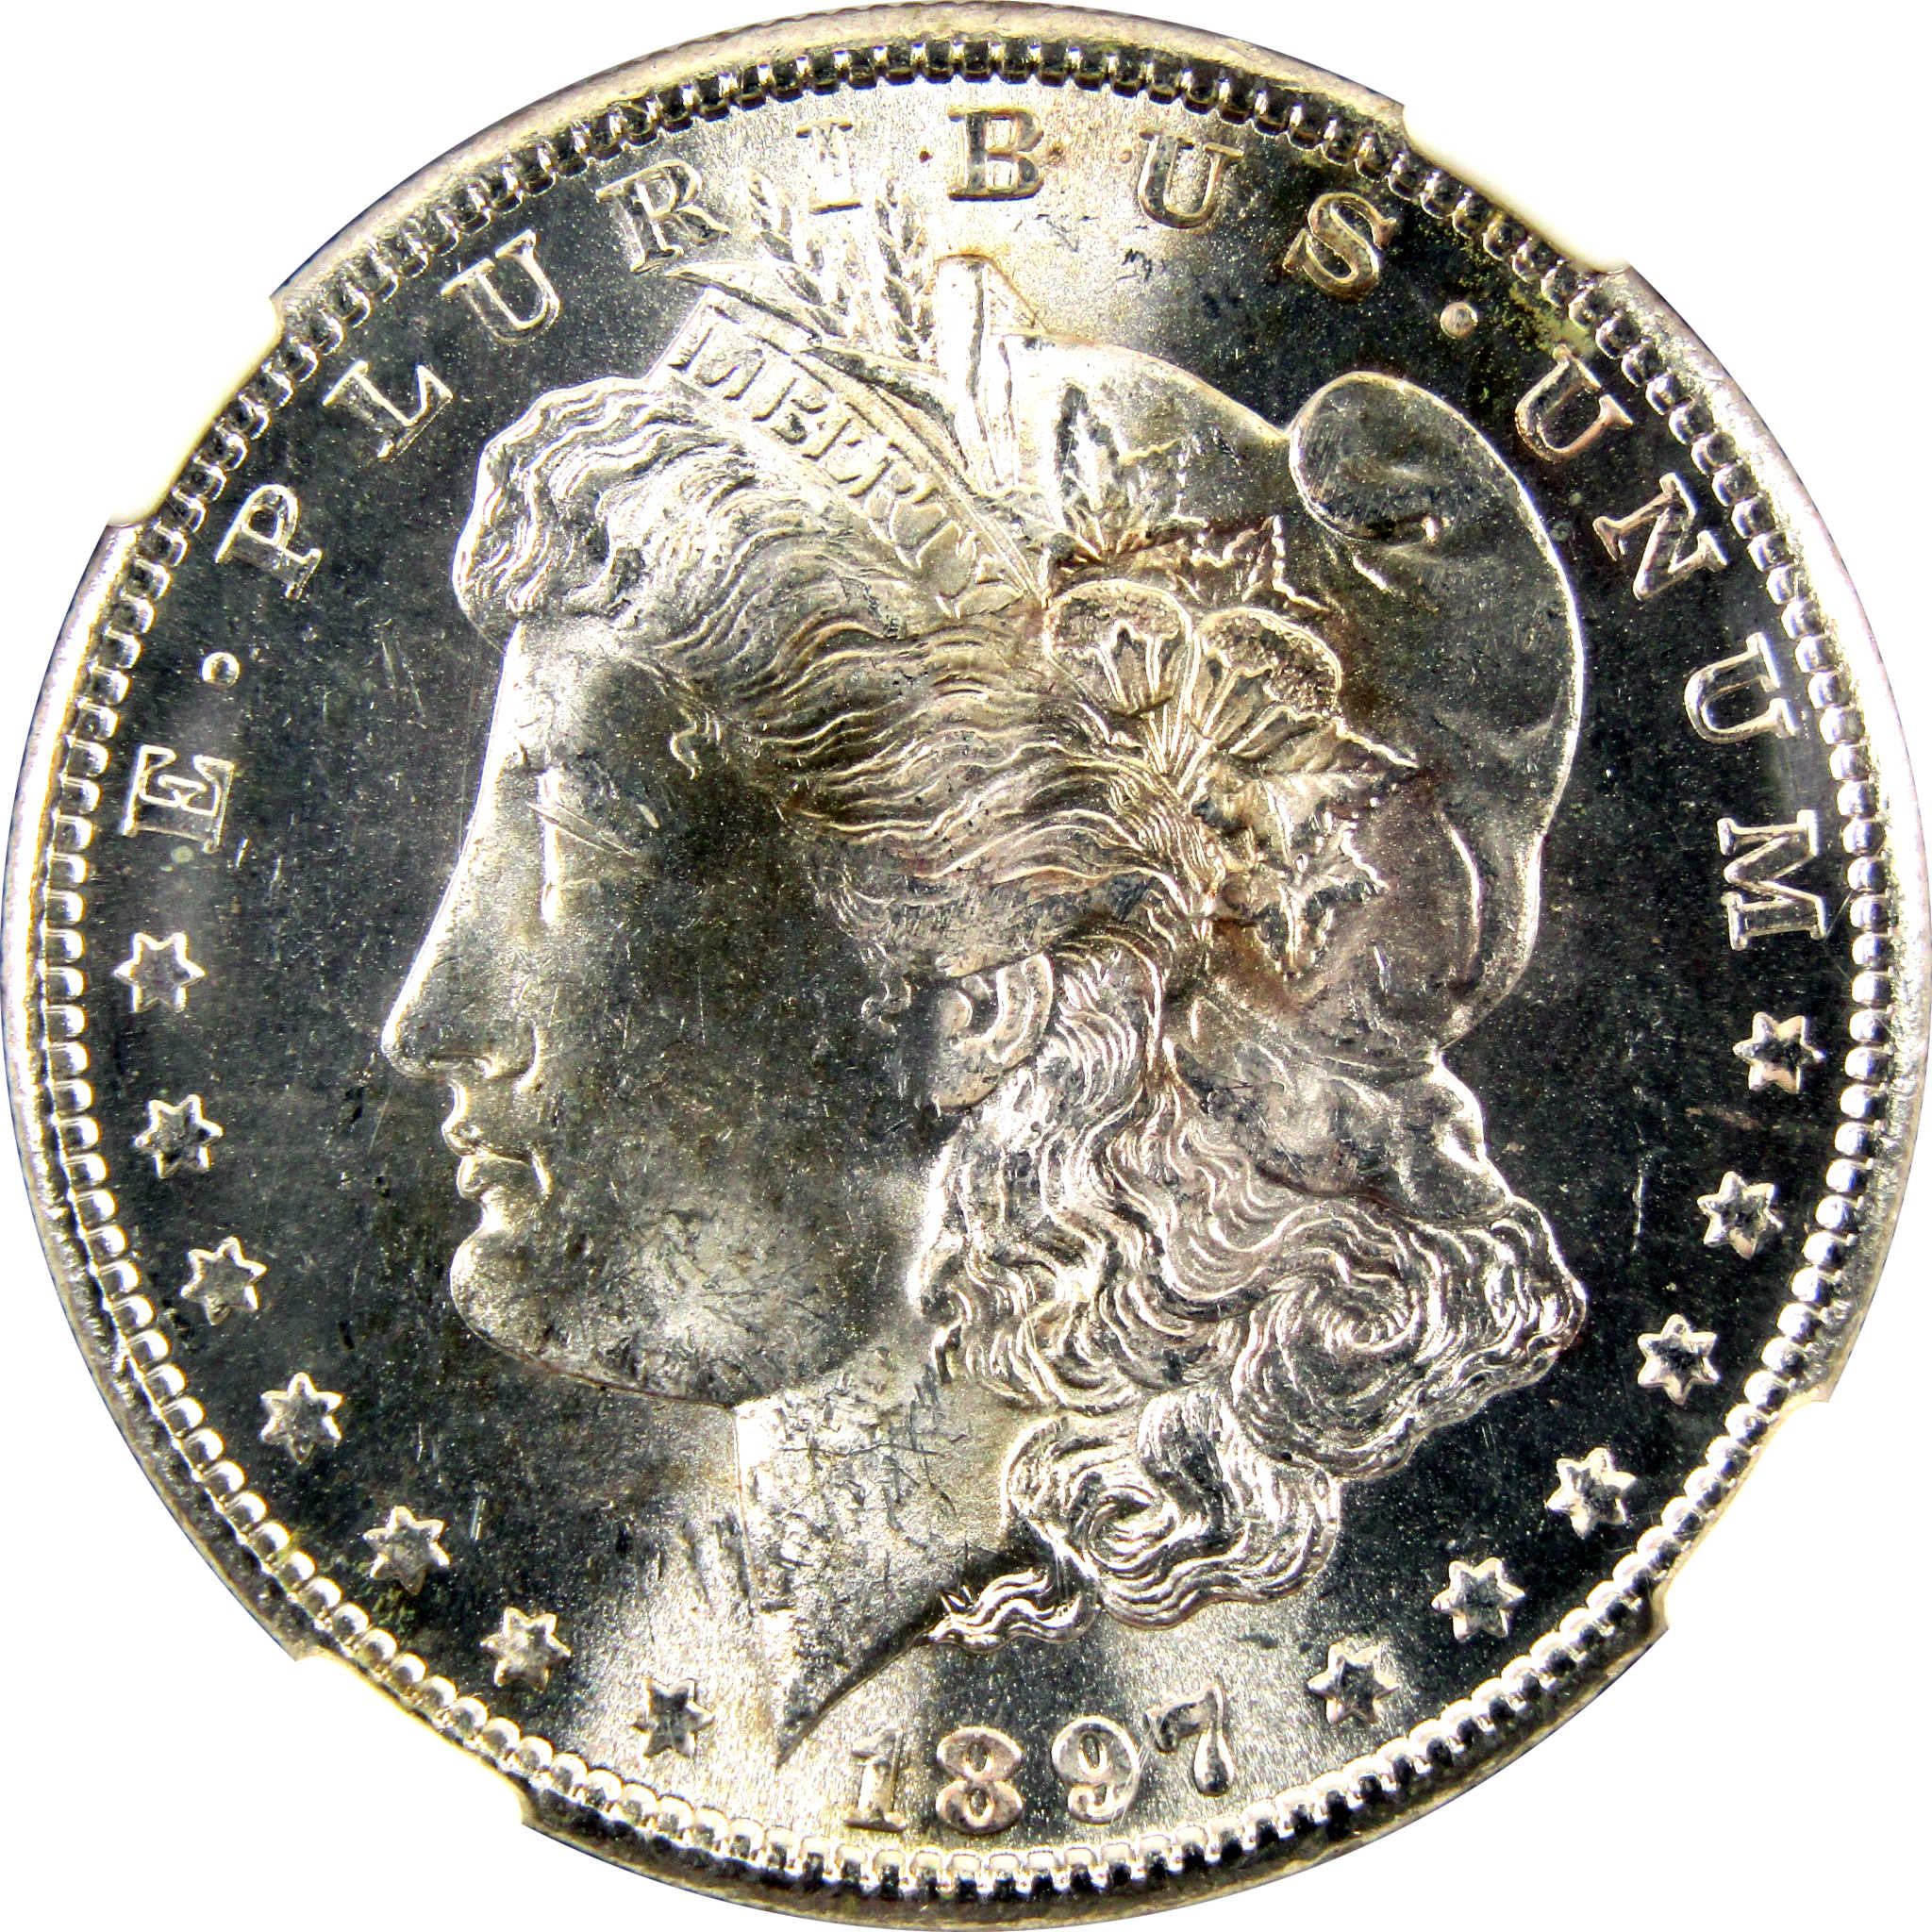 1897 S Morgan Dollar MS 63 NGC Silver $1 Uncirculated Coin SKU:I11023 - Morgan coin - Morgan silver dollar - Morgan silver dollar for sale - Profile Coins &amp; Collectibles